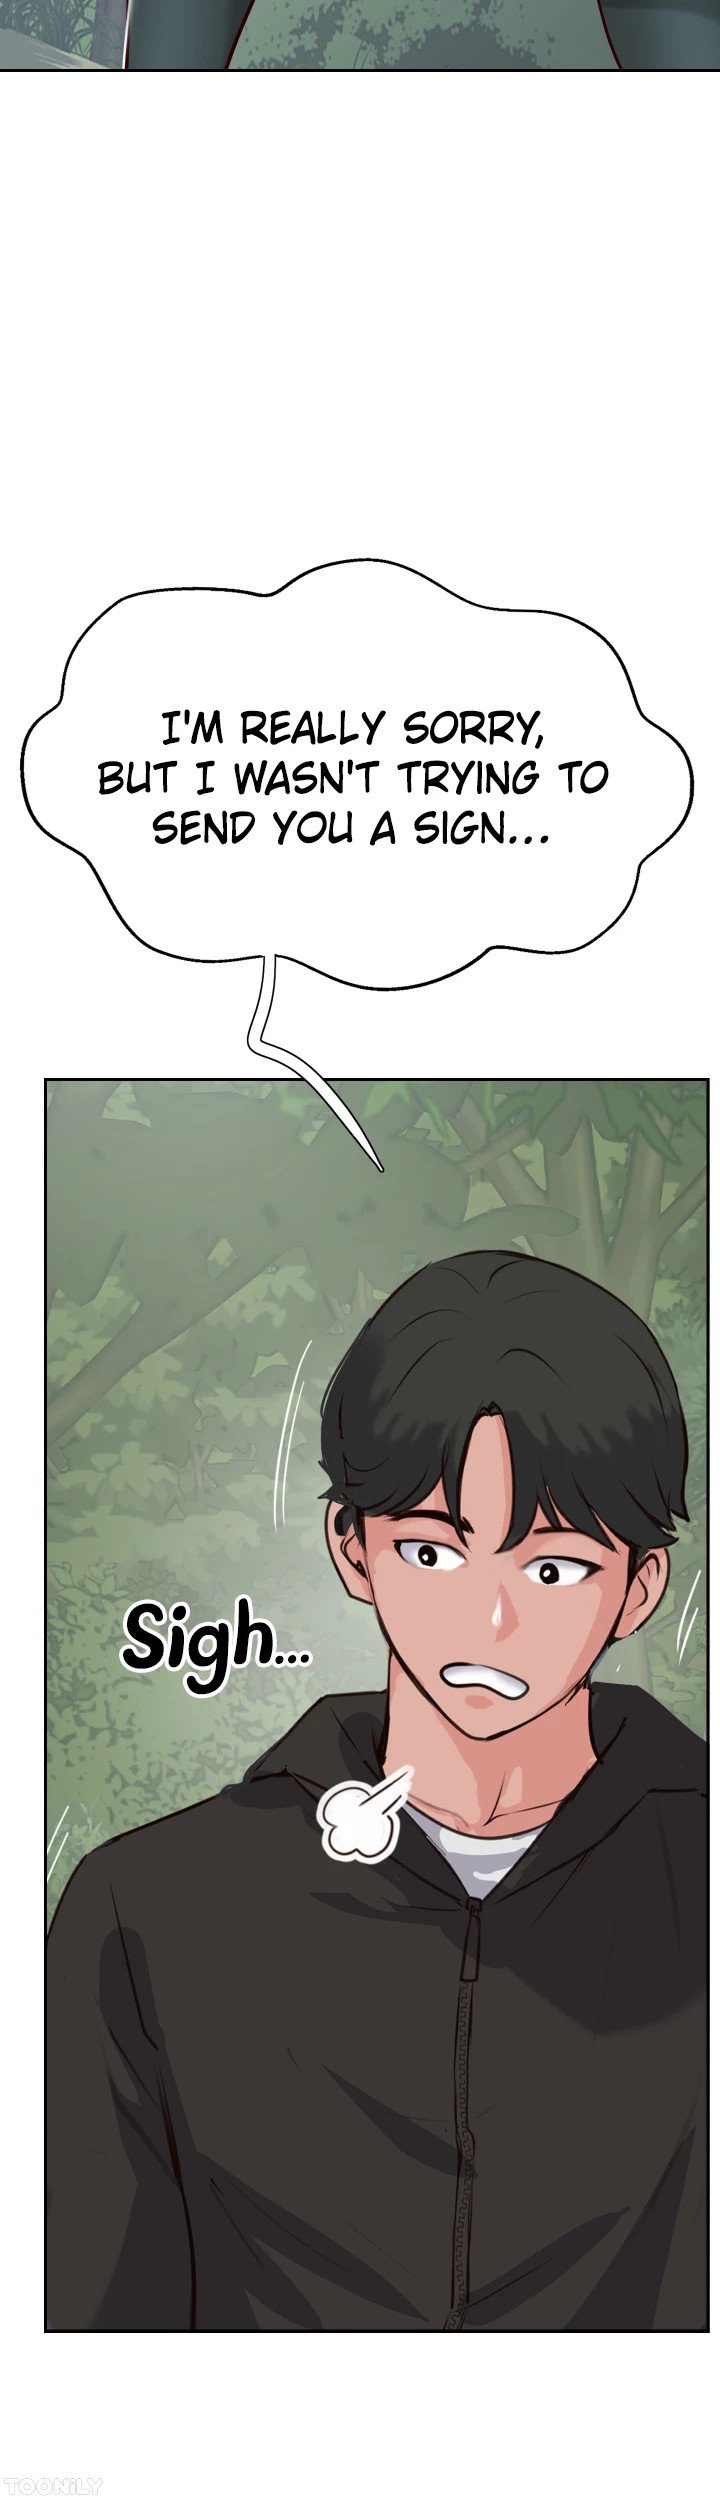 top-of-the-world-chap-34-27